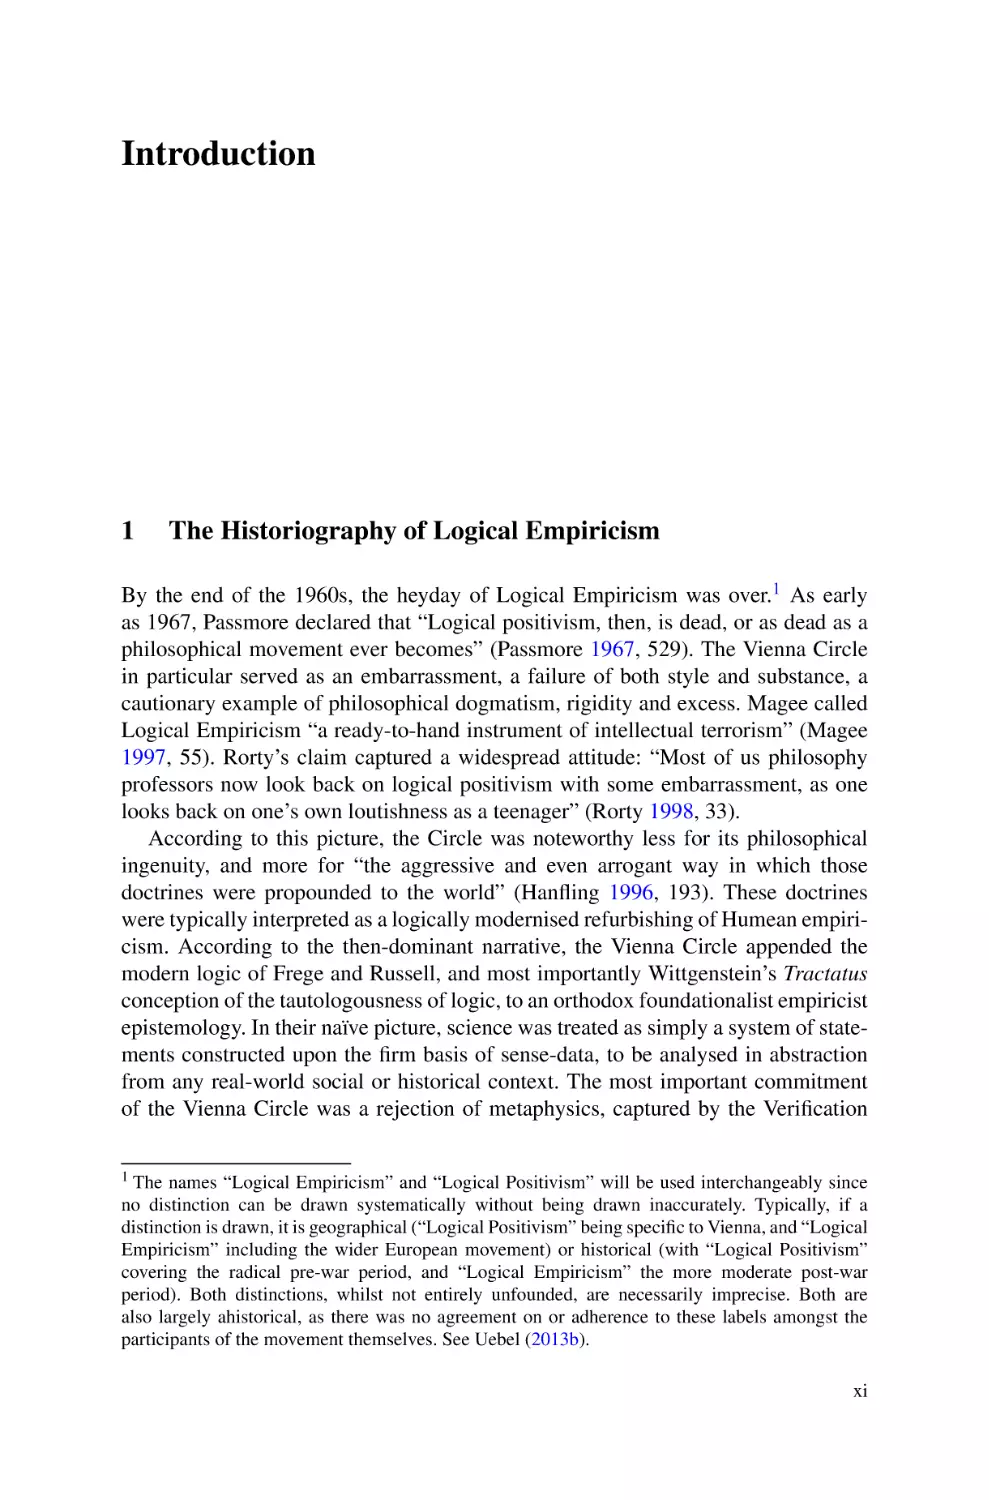 Introduction
1  The Historiography of Logical Empiricism